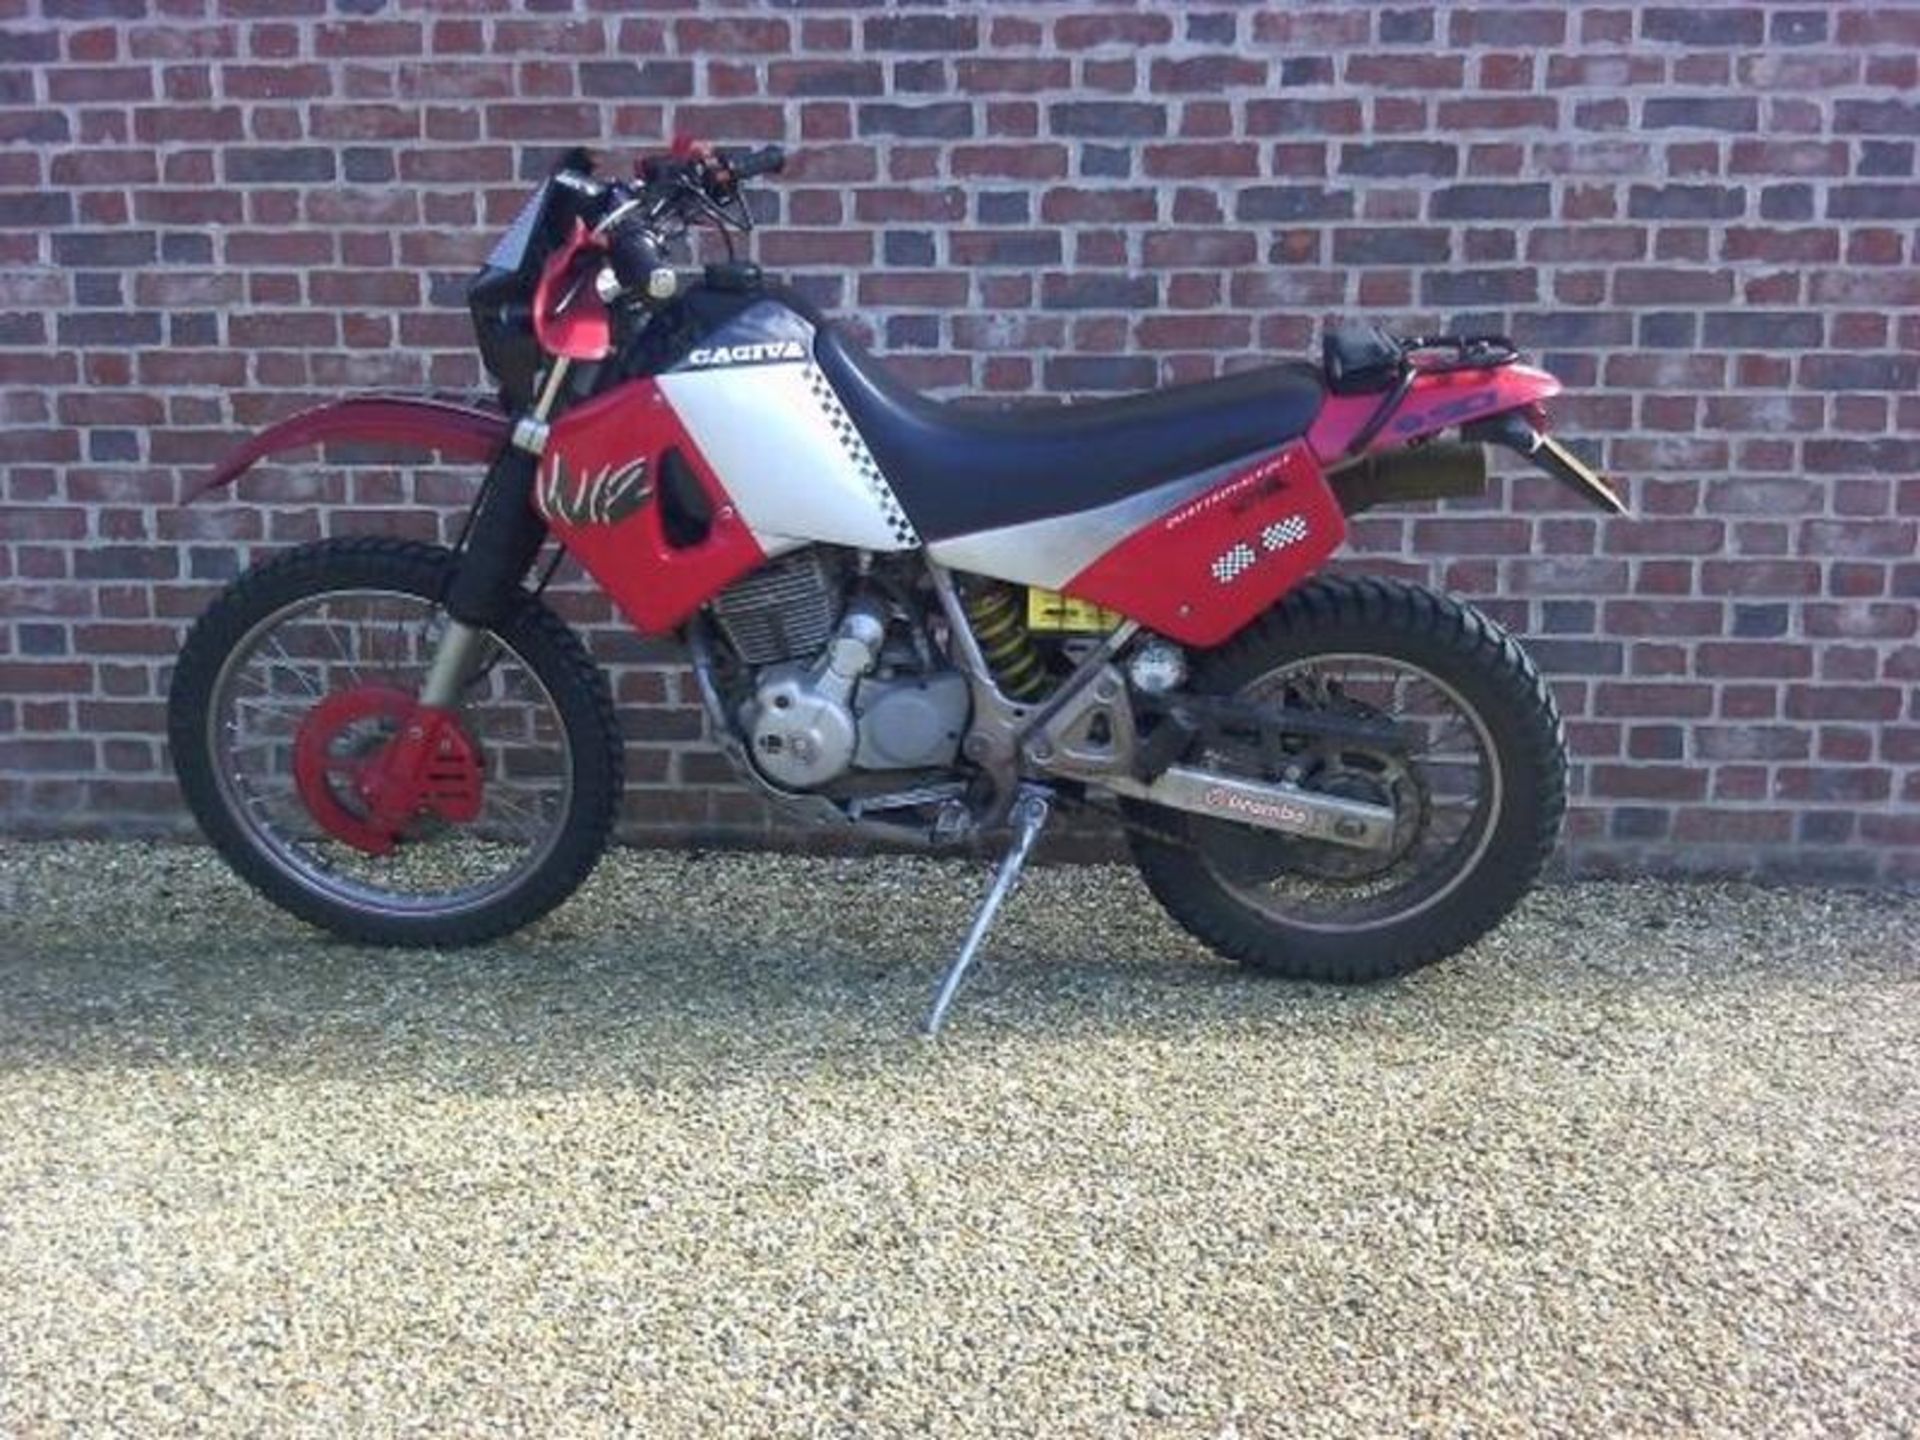 1993 350cc Cagiva W12 Reg No: K202 VPR Frame No: 000486 Engine No. 9201964 An air cooled 4-stroke - Image 3 of 4